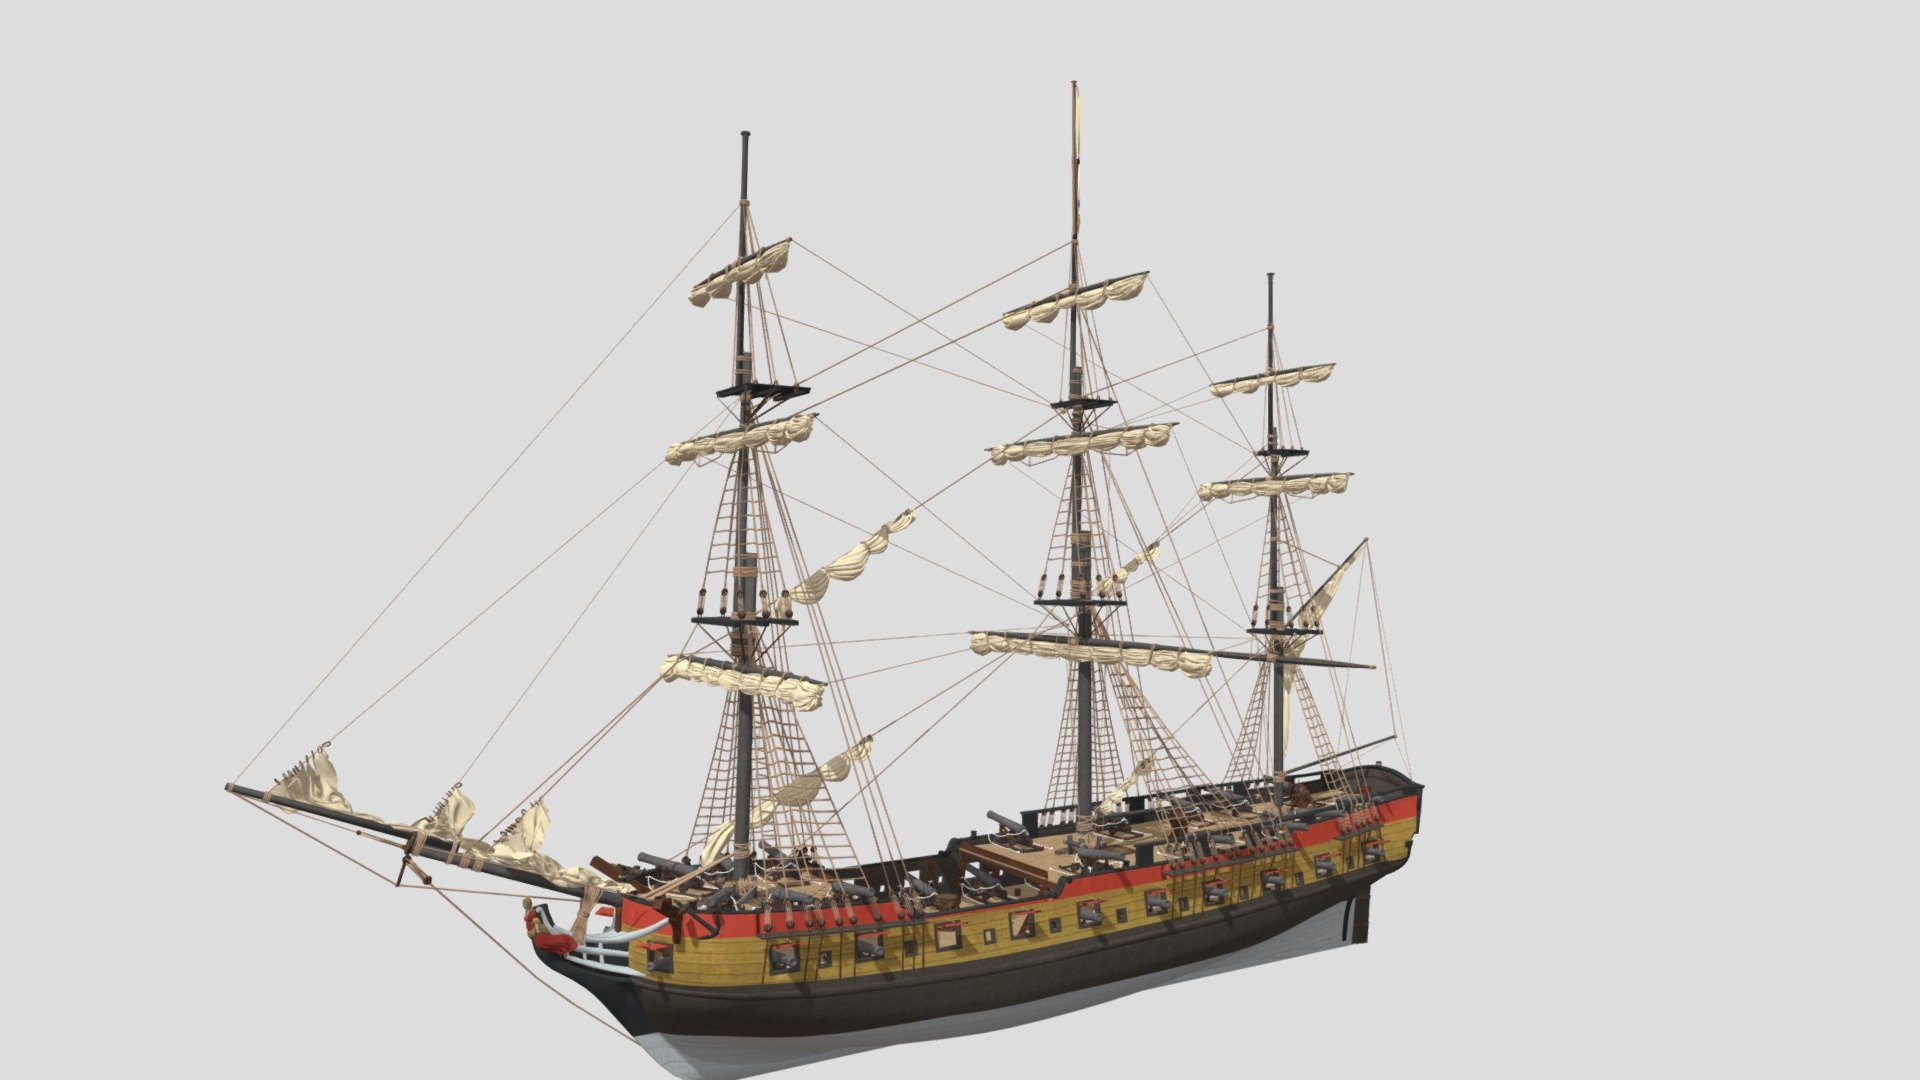 The Aleksander class frigate was the largest Russian archipelago navy class ship in 1790 on the Baltic Sea. Five of these ships took part in the Second Battle of Svensksund on July 9th and were lost (taken over, sunk, or burnt), while eight frigates in total were built during the war of 1788–1790 against Sweden. Aleksandr class frigates had a typical ship rig of the period. Aleksandr class is known as an archipelago or rowing frigate. The hull has nine smaller holes between gun deck main gun ports.

Hull dimensions:
•   Length at waterline: 39.60 m
•   Greatest width (breadth): 9.80 m
•   Greatest depth: 3.6 m

Project ship 01B, Russian Aleksander Frigate Class, Open sails, 9.5.2020, programs: Blender, Substance Painter, UE4

This model was created in the National Museum of Finland project &ldquo;Historia eläväksi digitaalisella tarinankerronnalla